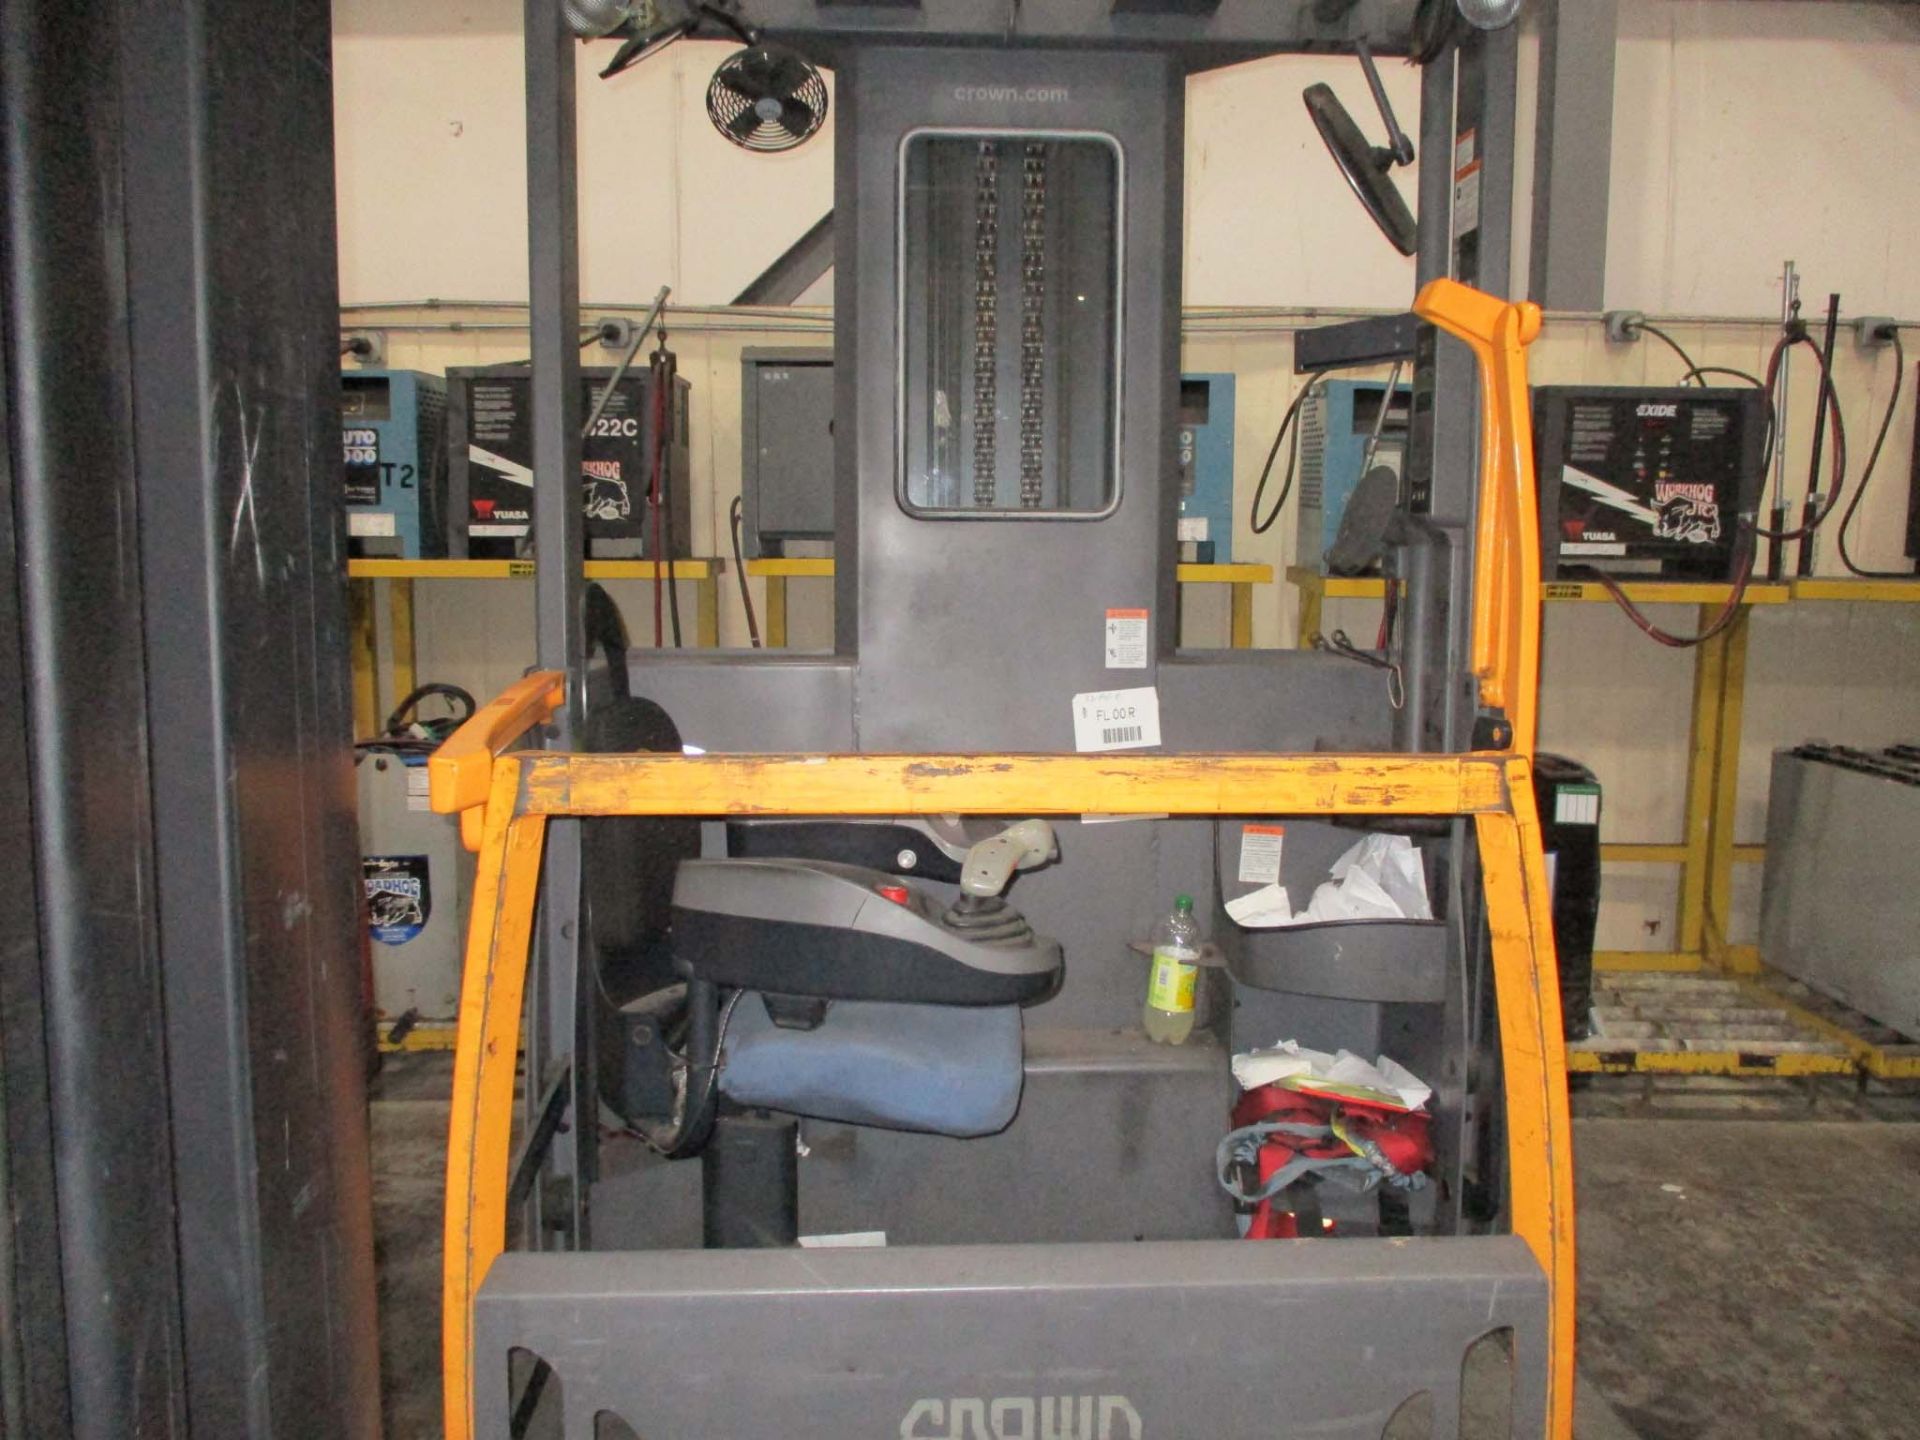 Rotating Arm Fork Lift - Crown - Image 6 of 15